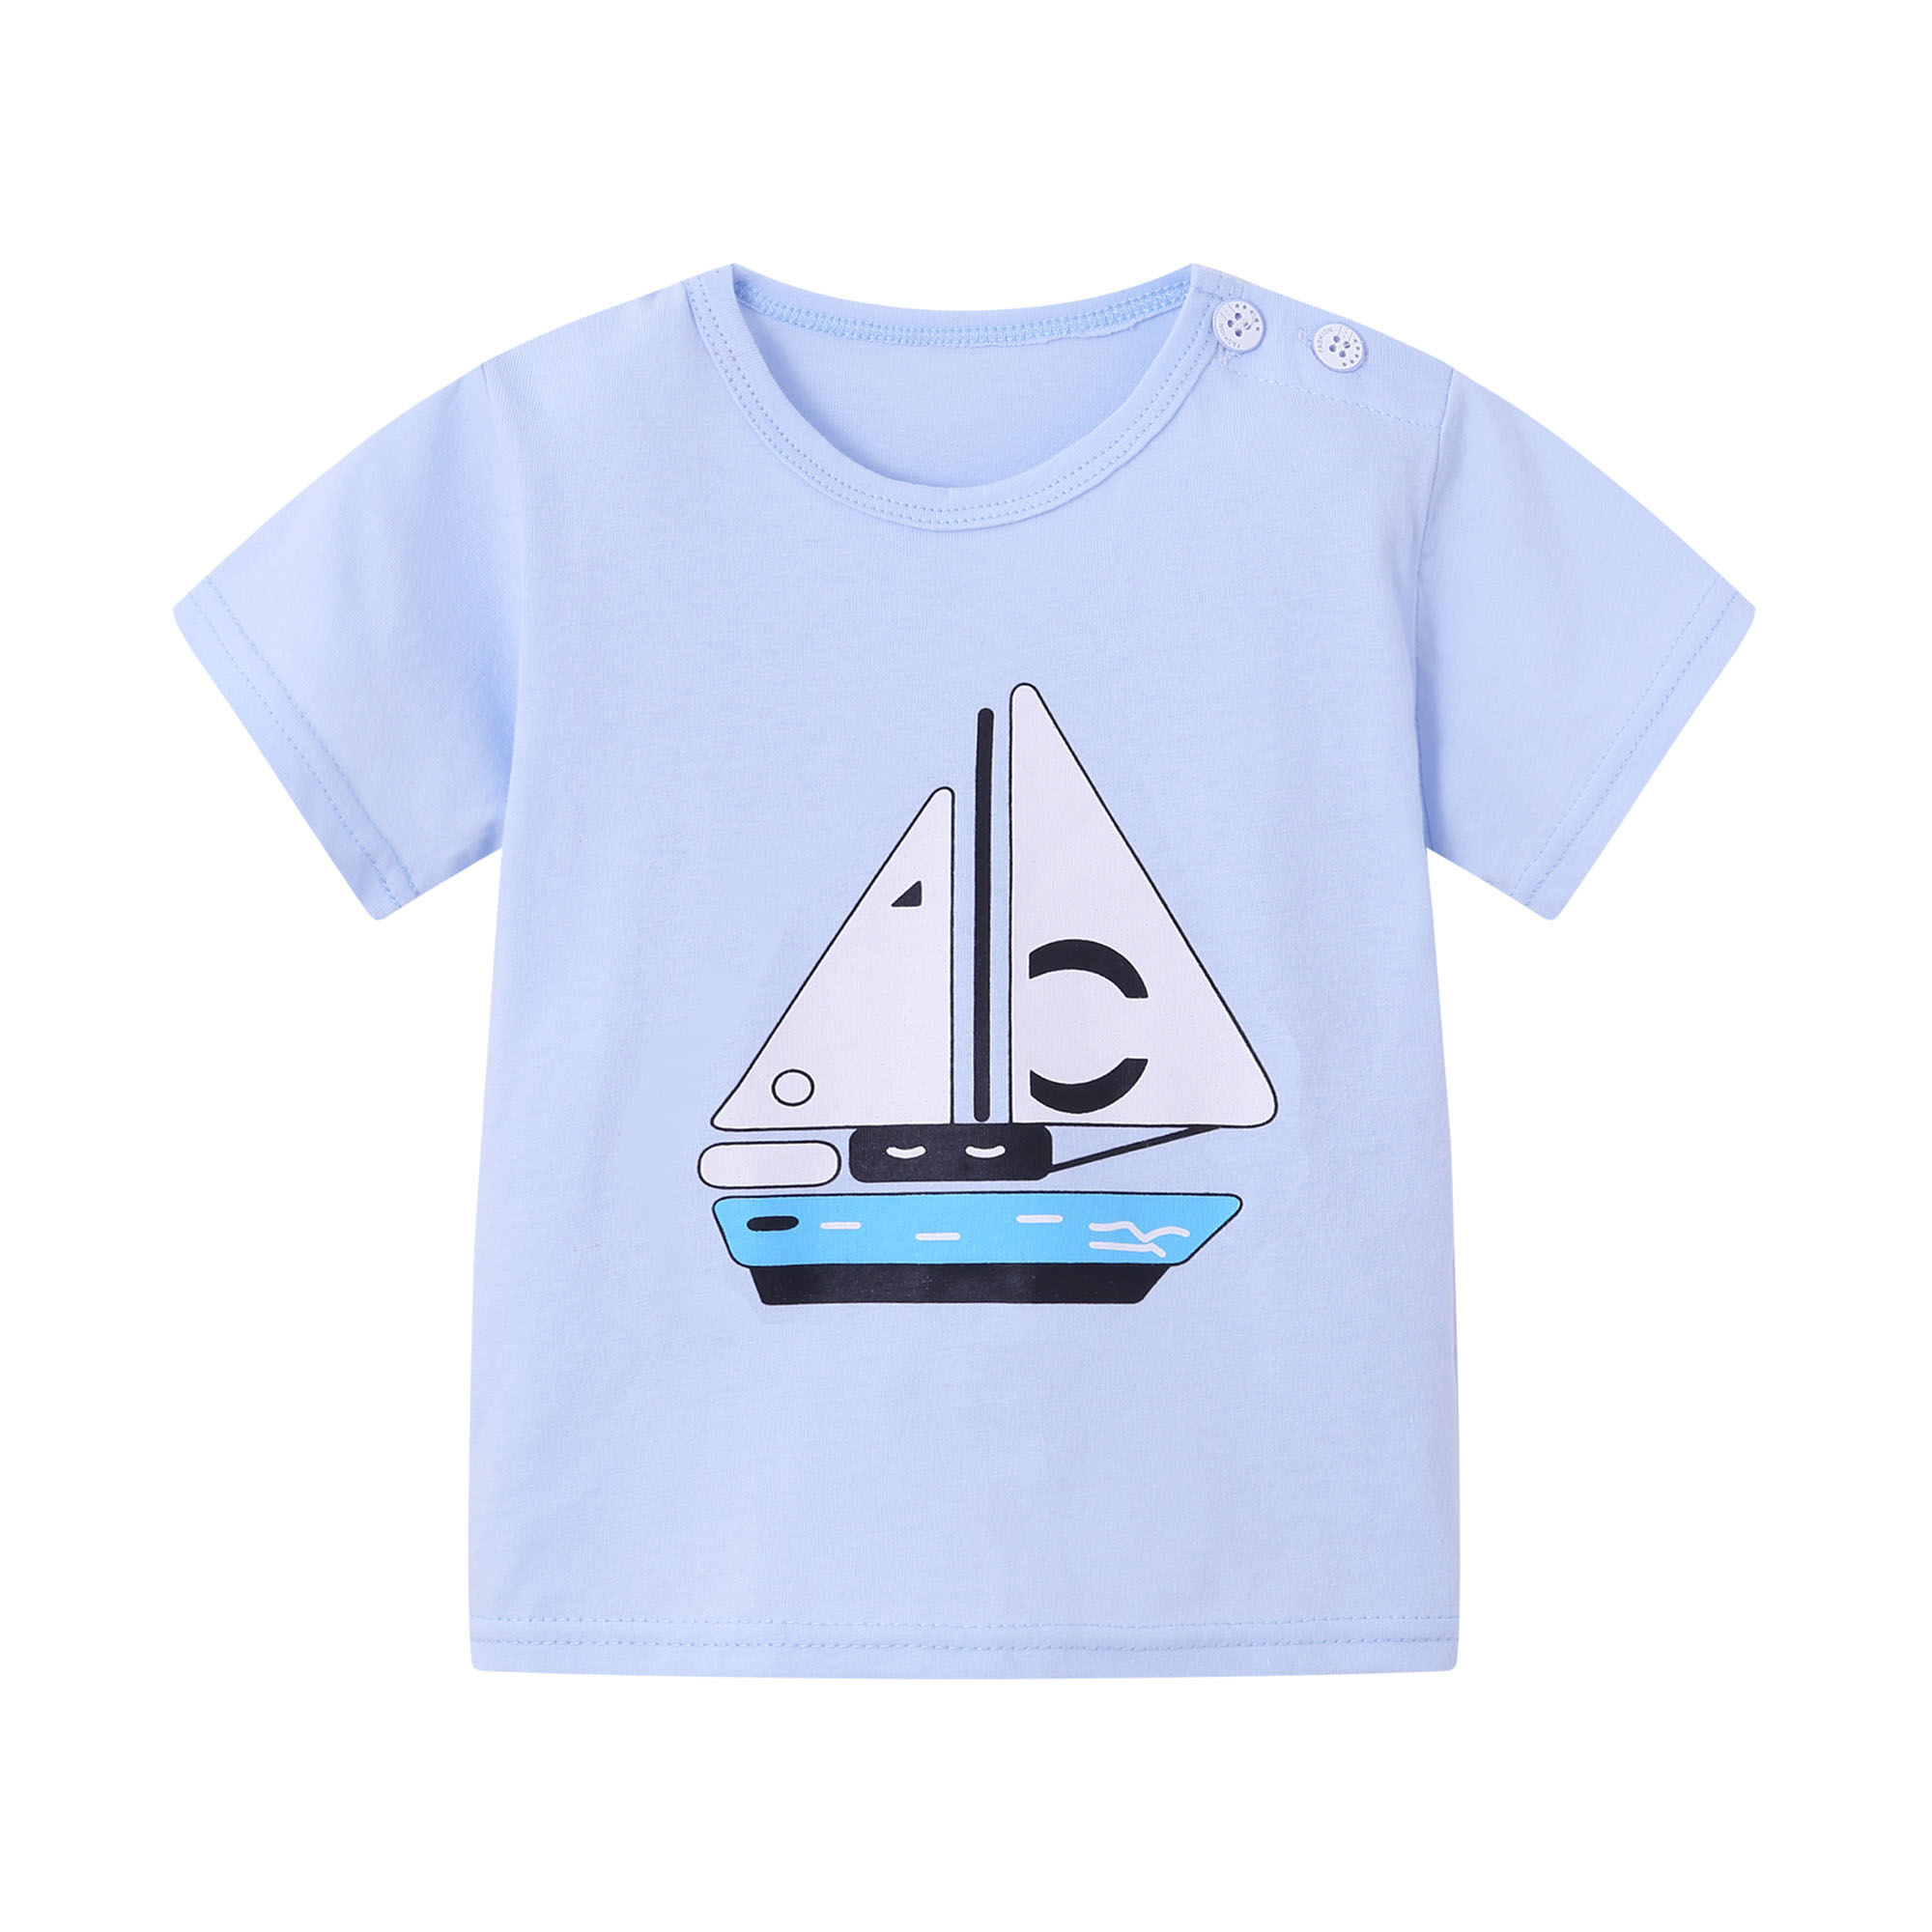 100% cotton tee for babies | 100% cotton fee for boys| graphic tee for kids with boat | light blue cotton t-shirt